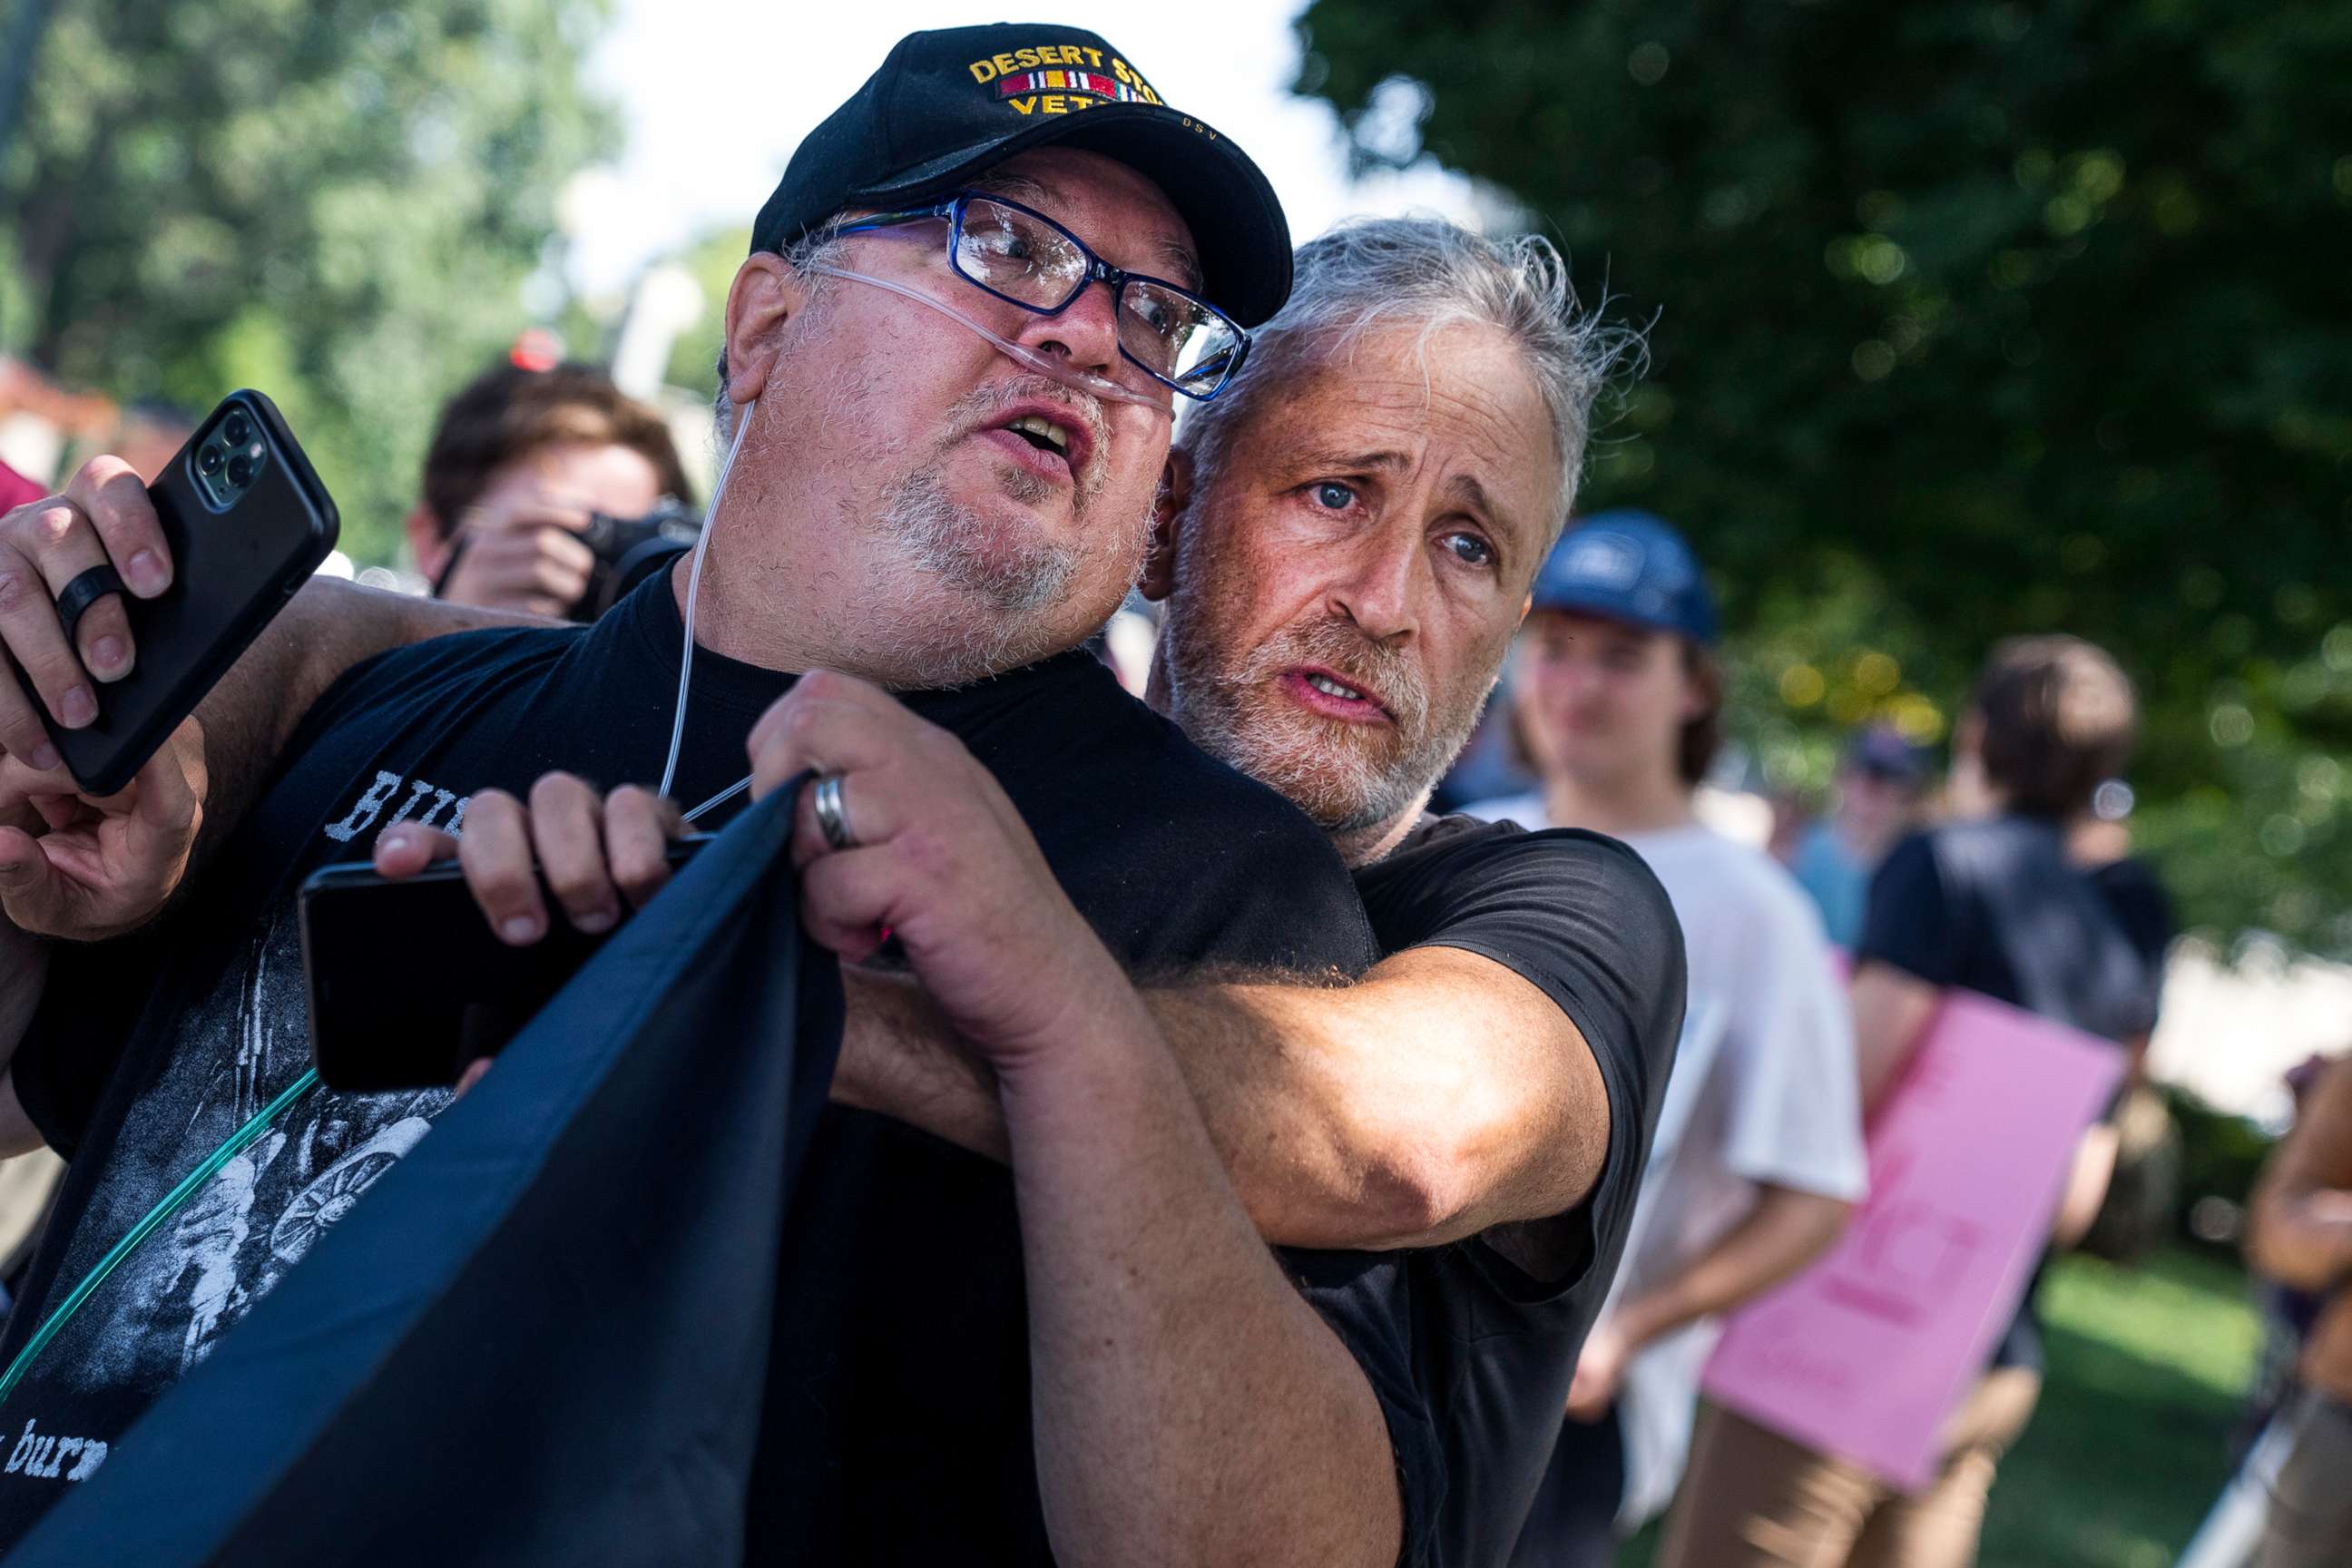 PHOTO: Jon Stewart hugs Tim Hauser, an Air Force veteran, at a rally to call on the Senate to pass the Pact Act, which aims to expand health care and benefits to veterans exposed to toxins while serving, outside the Capitol in Washington, Aug., 2, 2022.